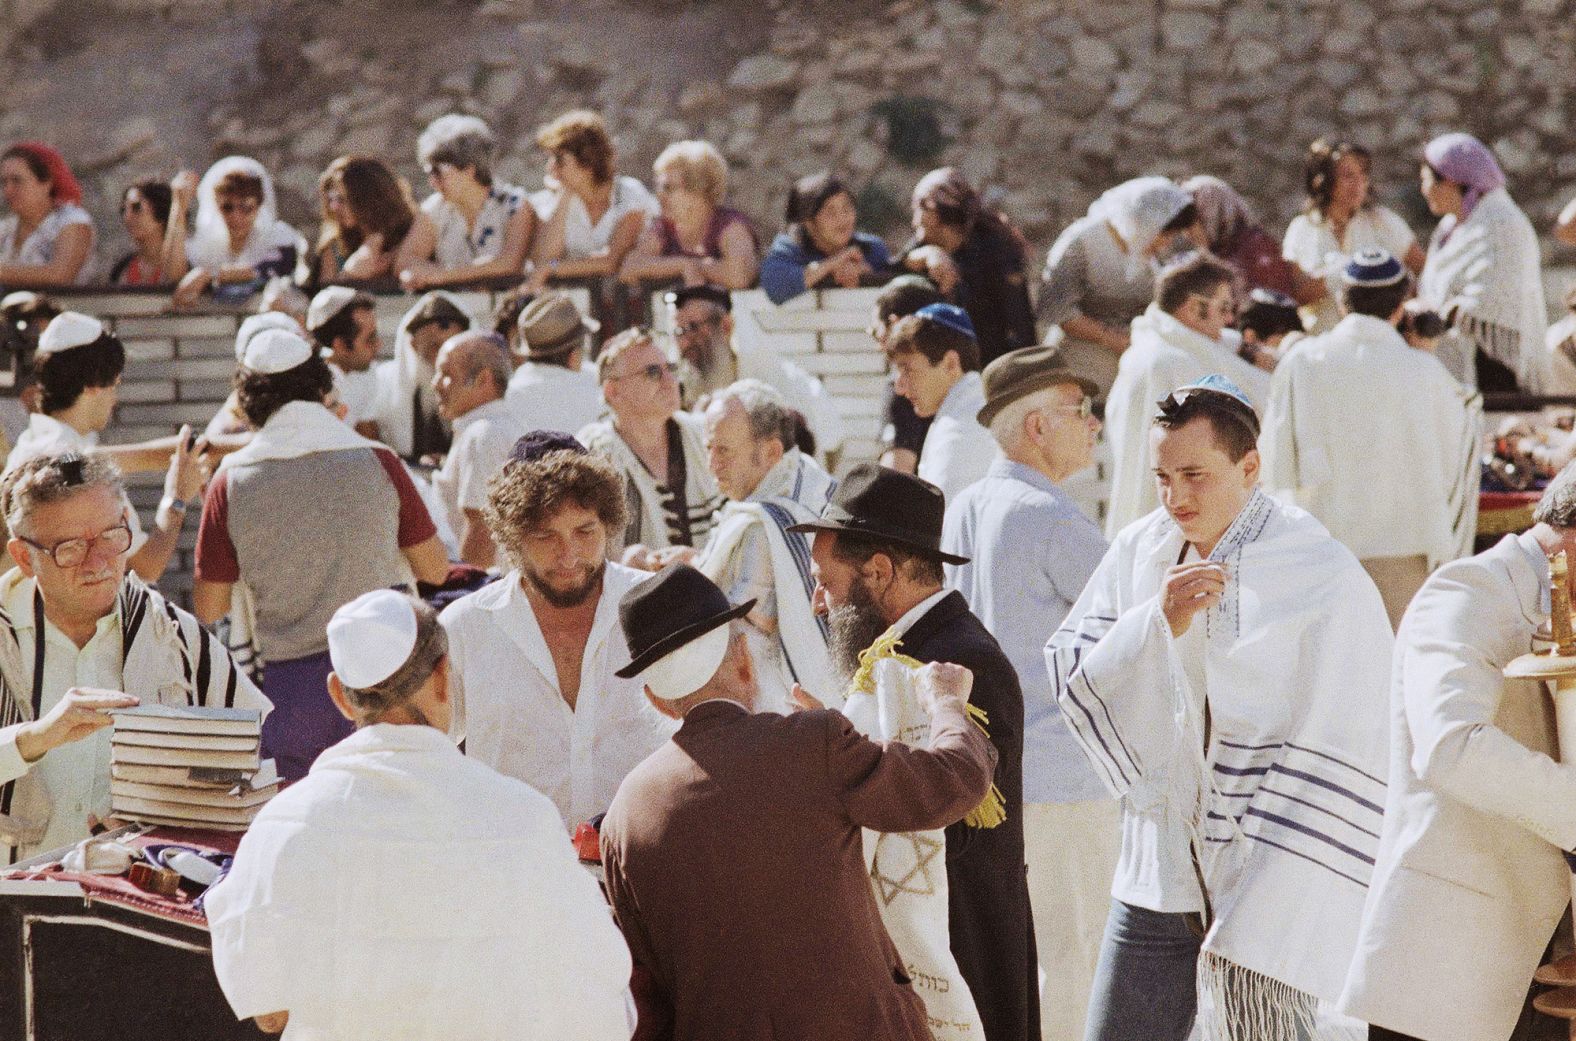 Dylan attends a bar mitzvah for one of his sons at the Western Wall in Jerusalem in 1983.